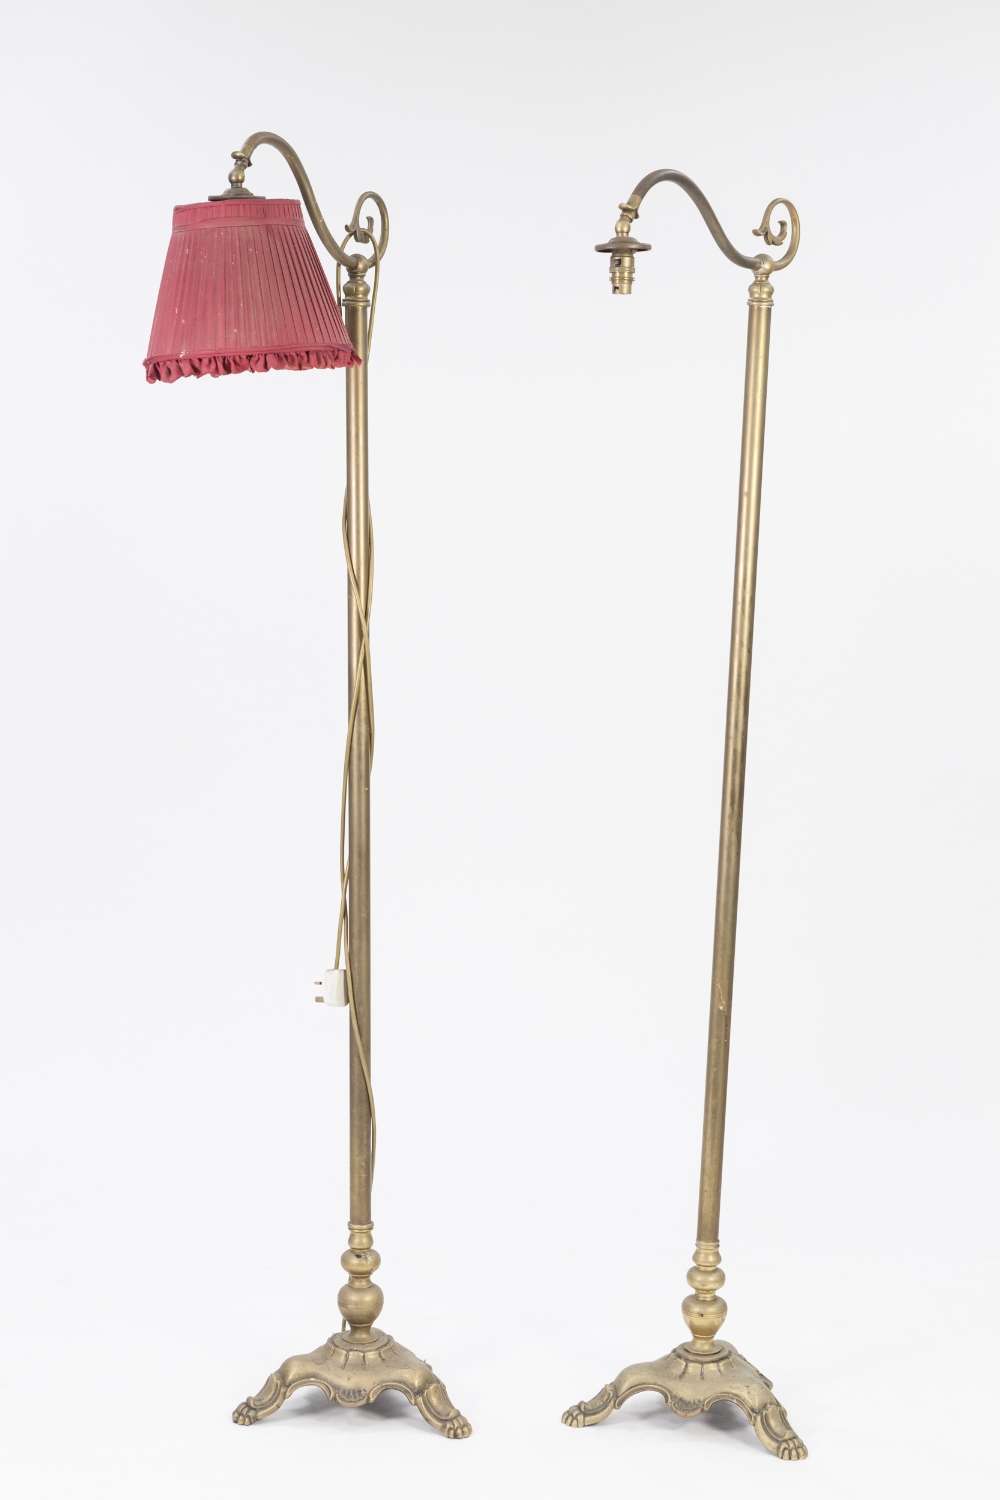 PAIR OF EDWARDIAN BRASS STANDARD LAMPS, each with plain column, scroll arm and tri form base with